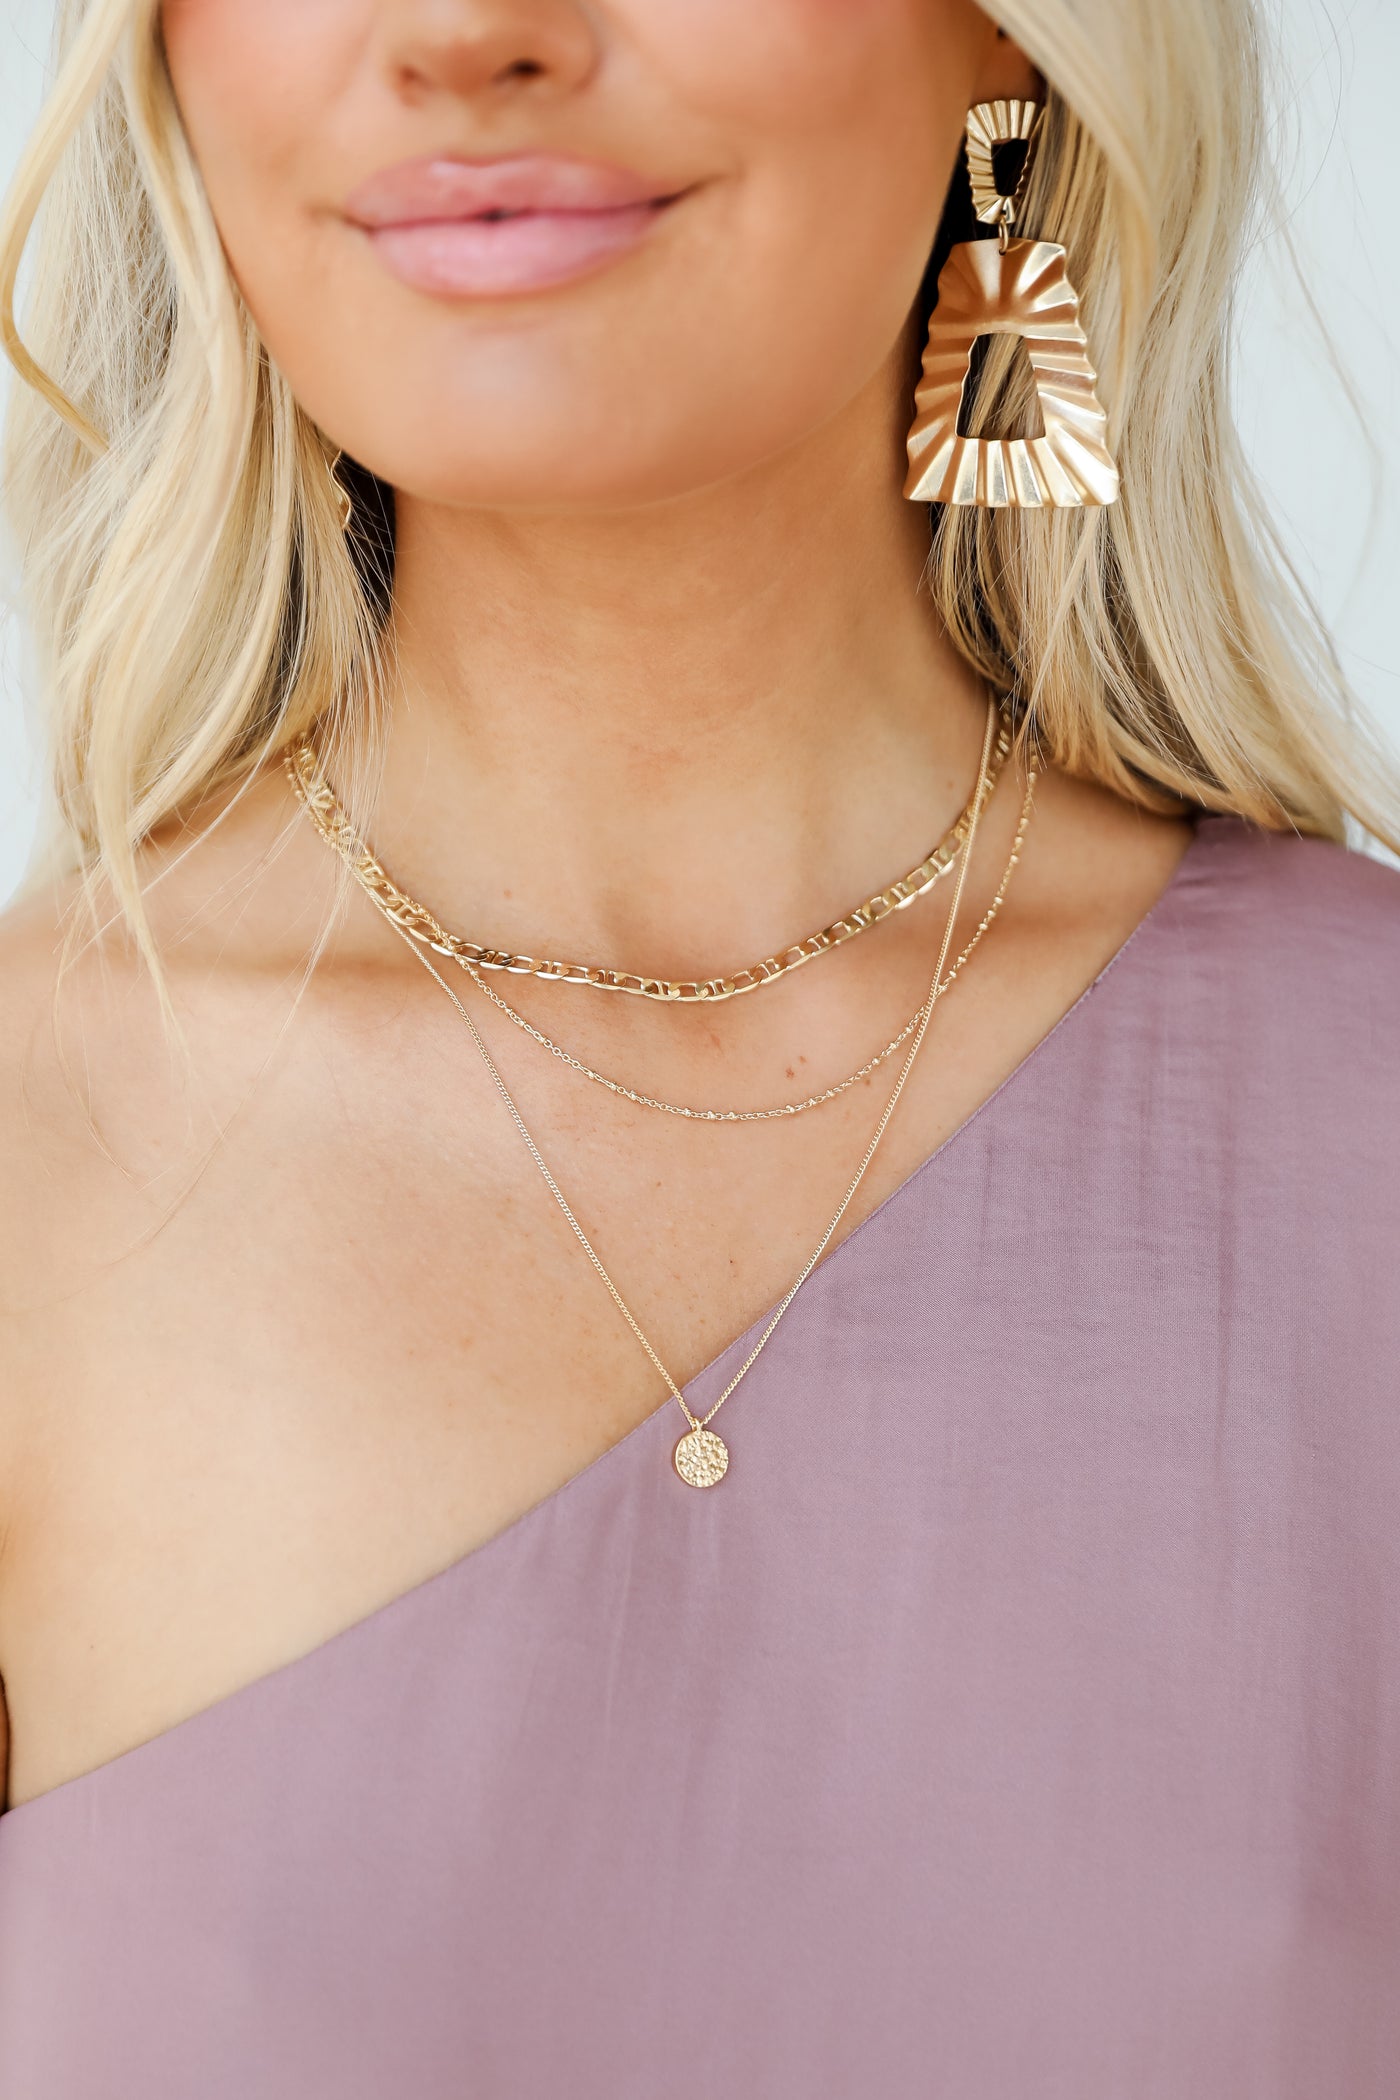 Gold Layered Chain Necklace on model